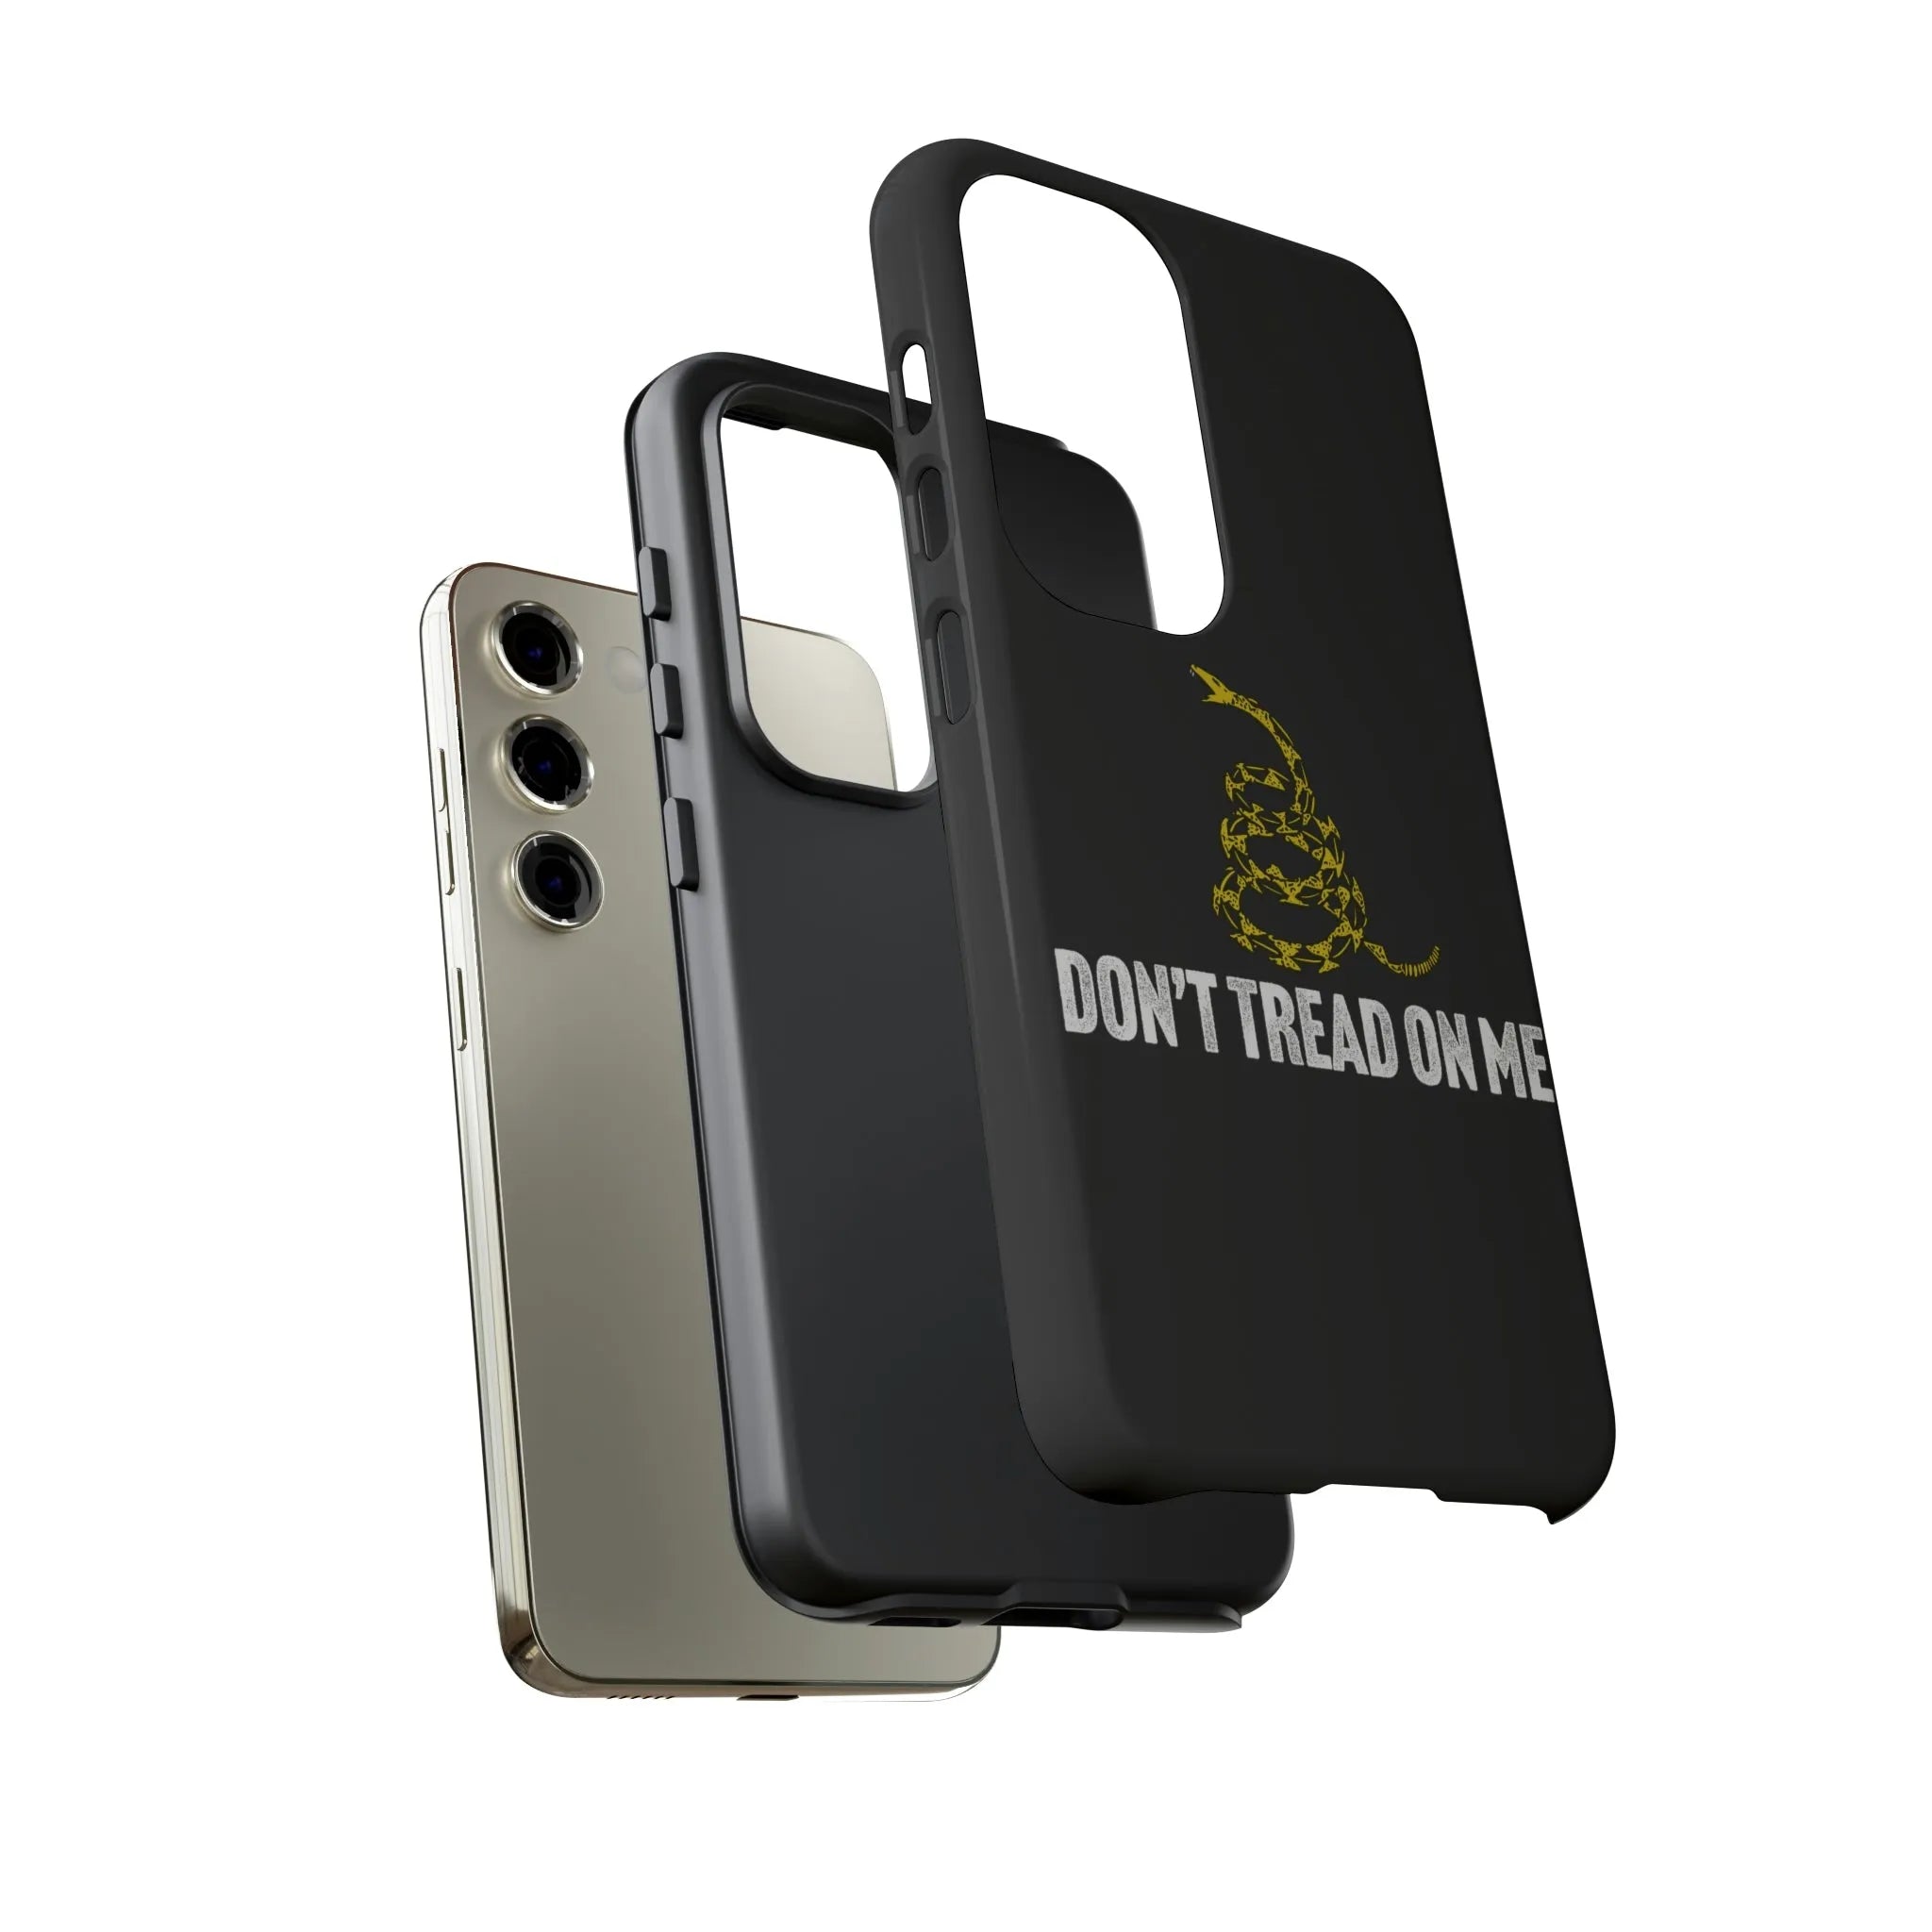 "Don't Tread on Me" Phone Case